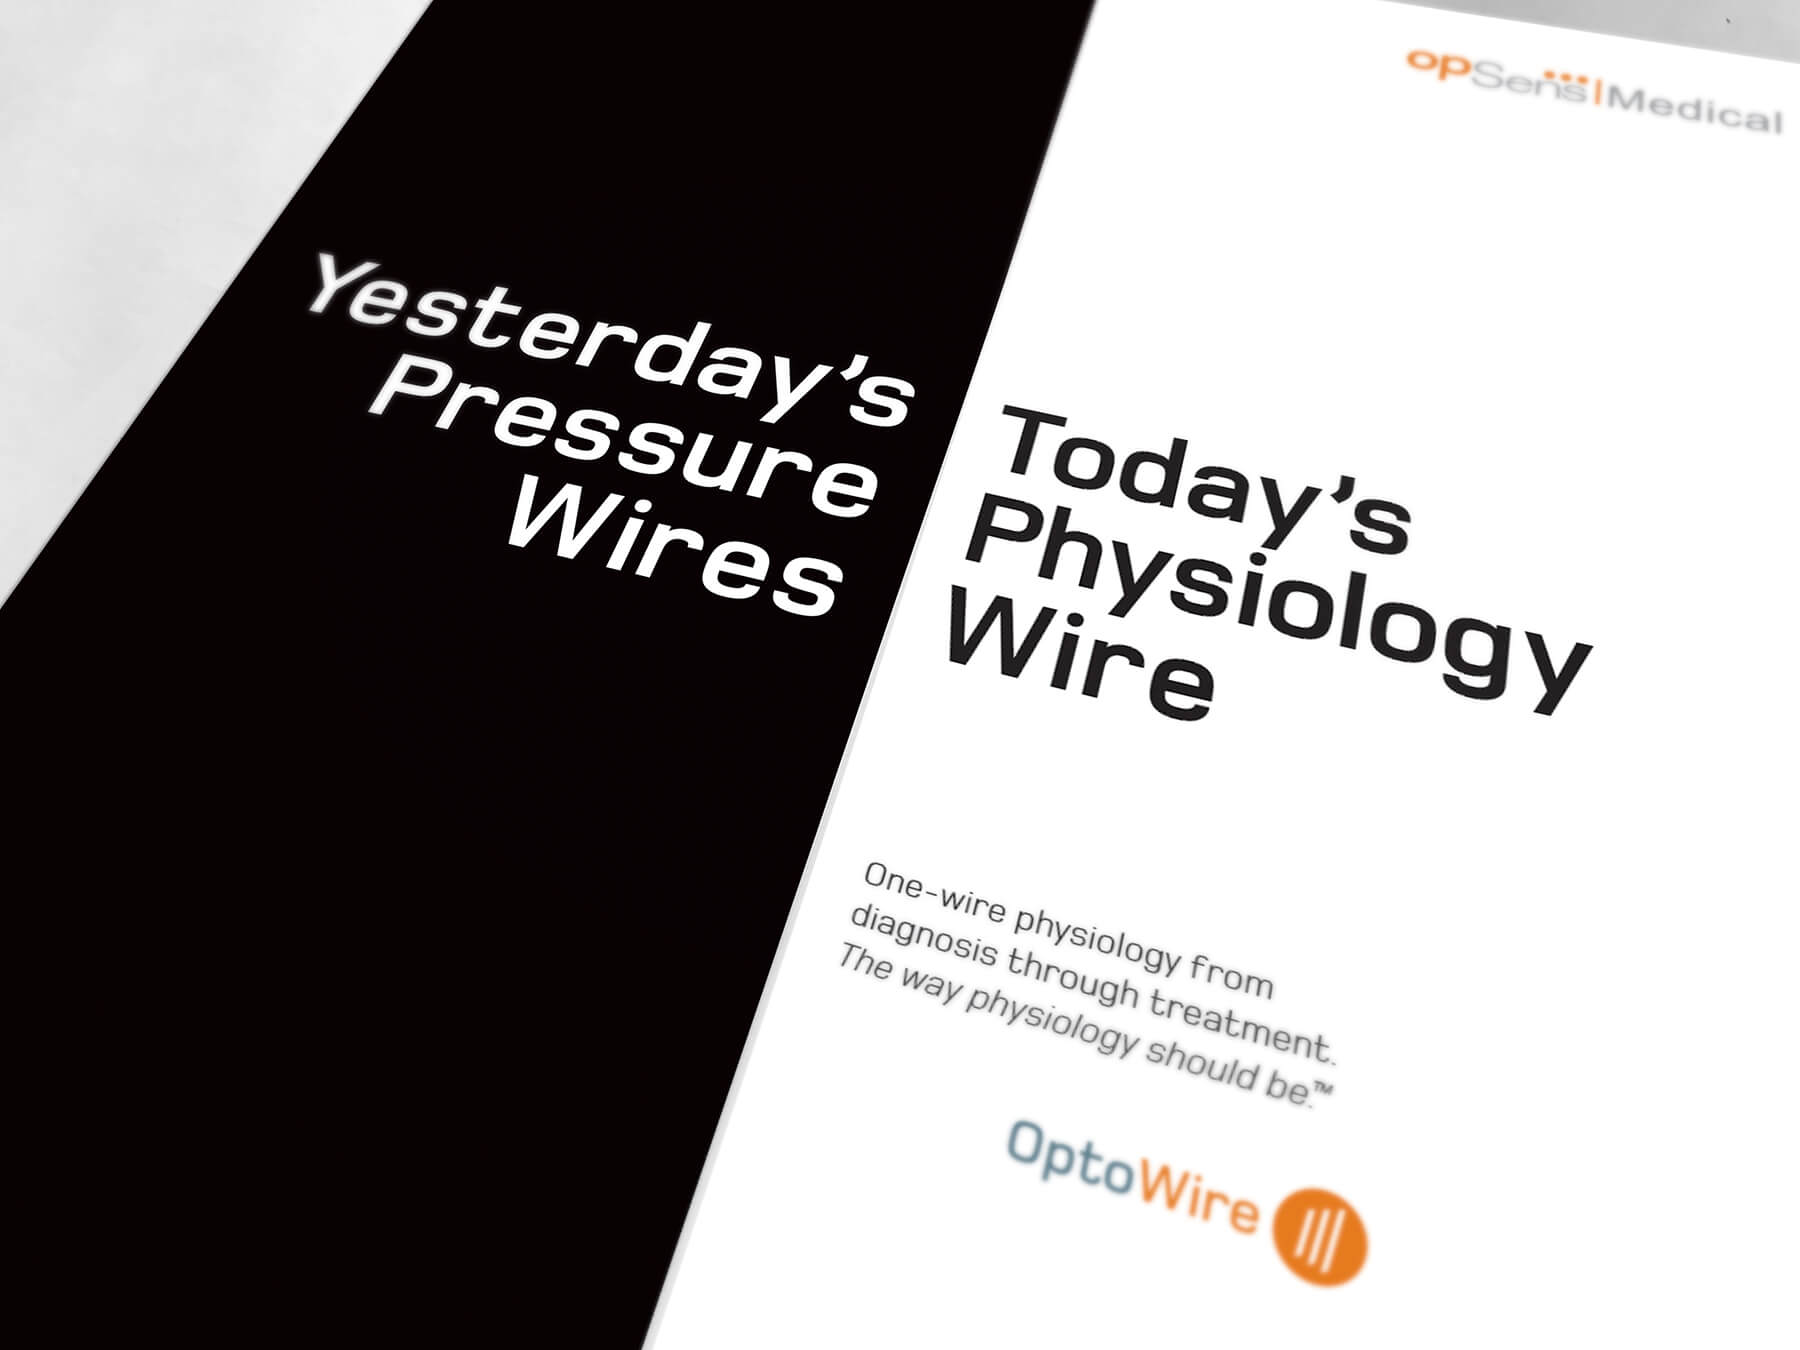 Graphic mockup of the cover of a brochure. Text on brochure says: Yesterday's Pressure Wires, Today's physiology Wire. One-wire physiology from diagnosis through treatment. The way physiology should be.™ OptoWire logo. 